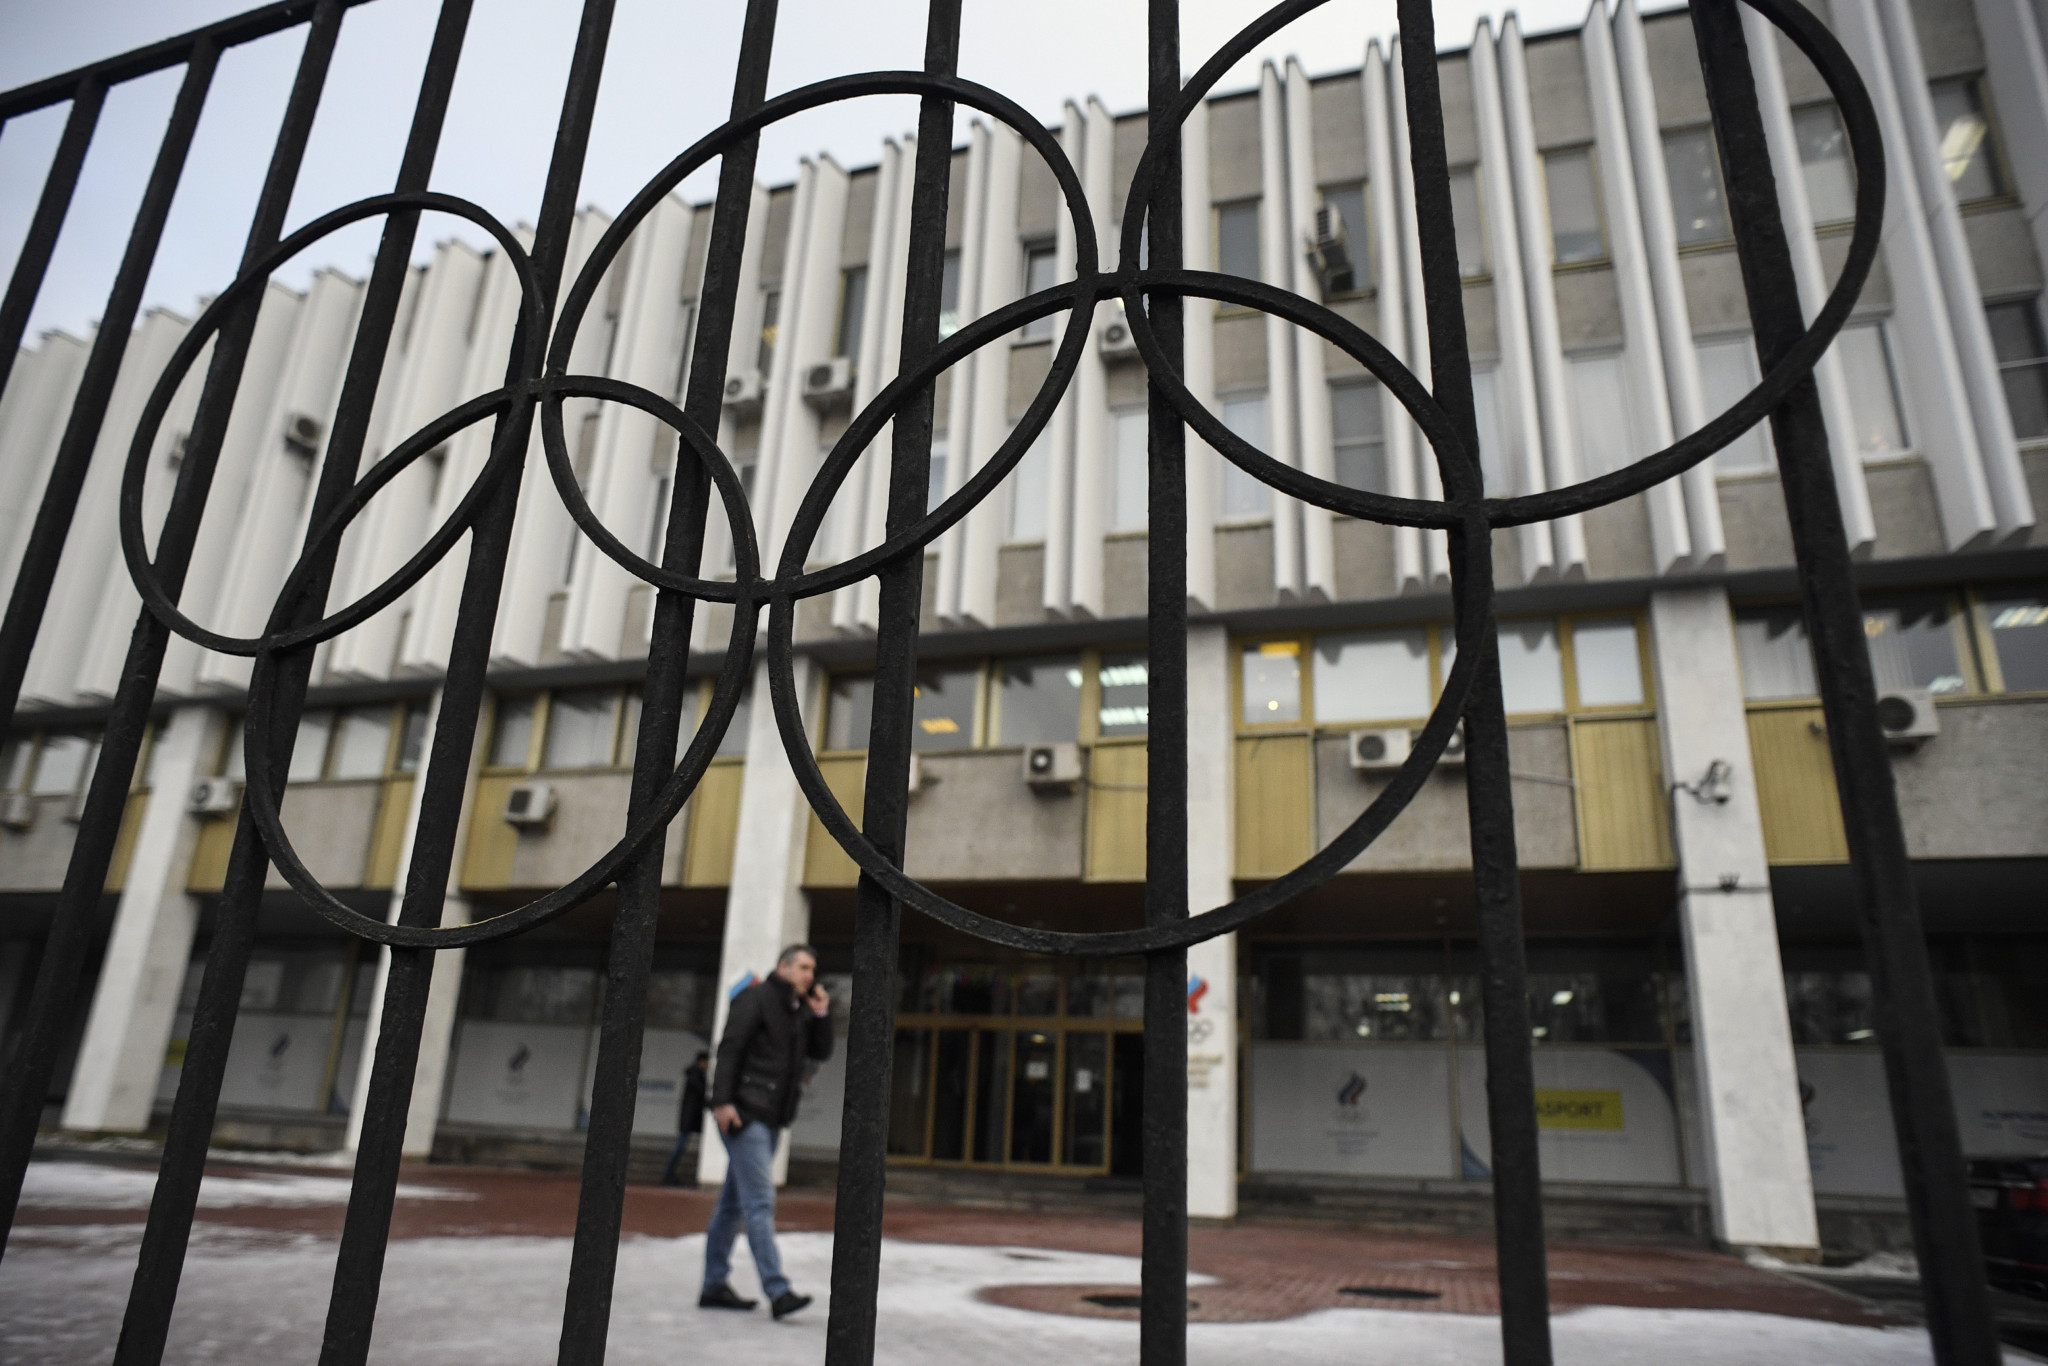 Russian athletes will participate neutrally at Pyeongchang 2018 following the doping crisis in their country ©Getty Images